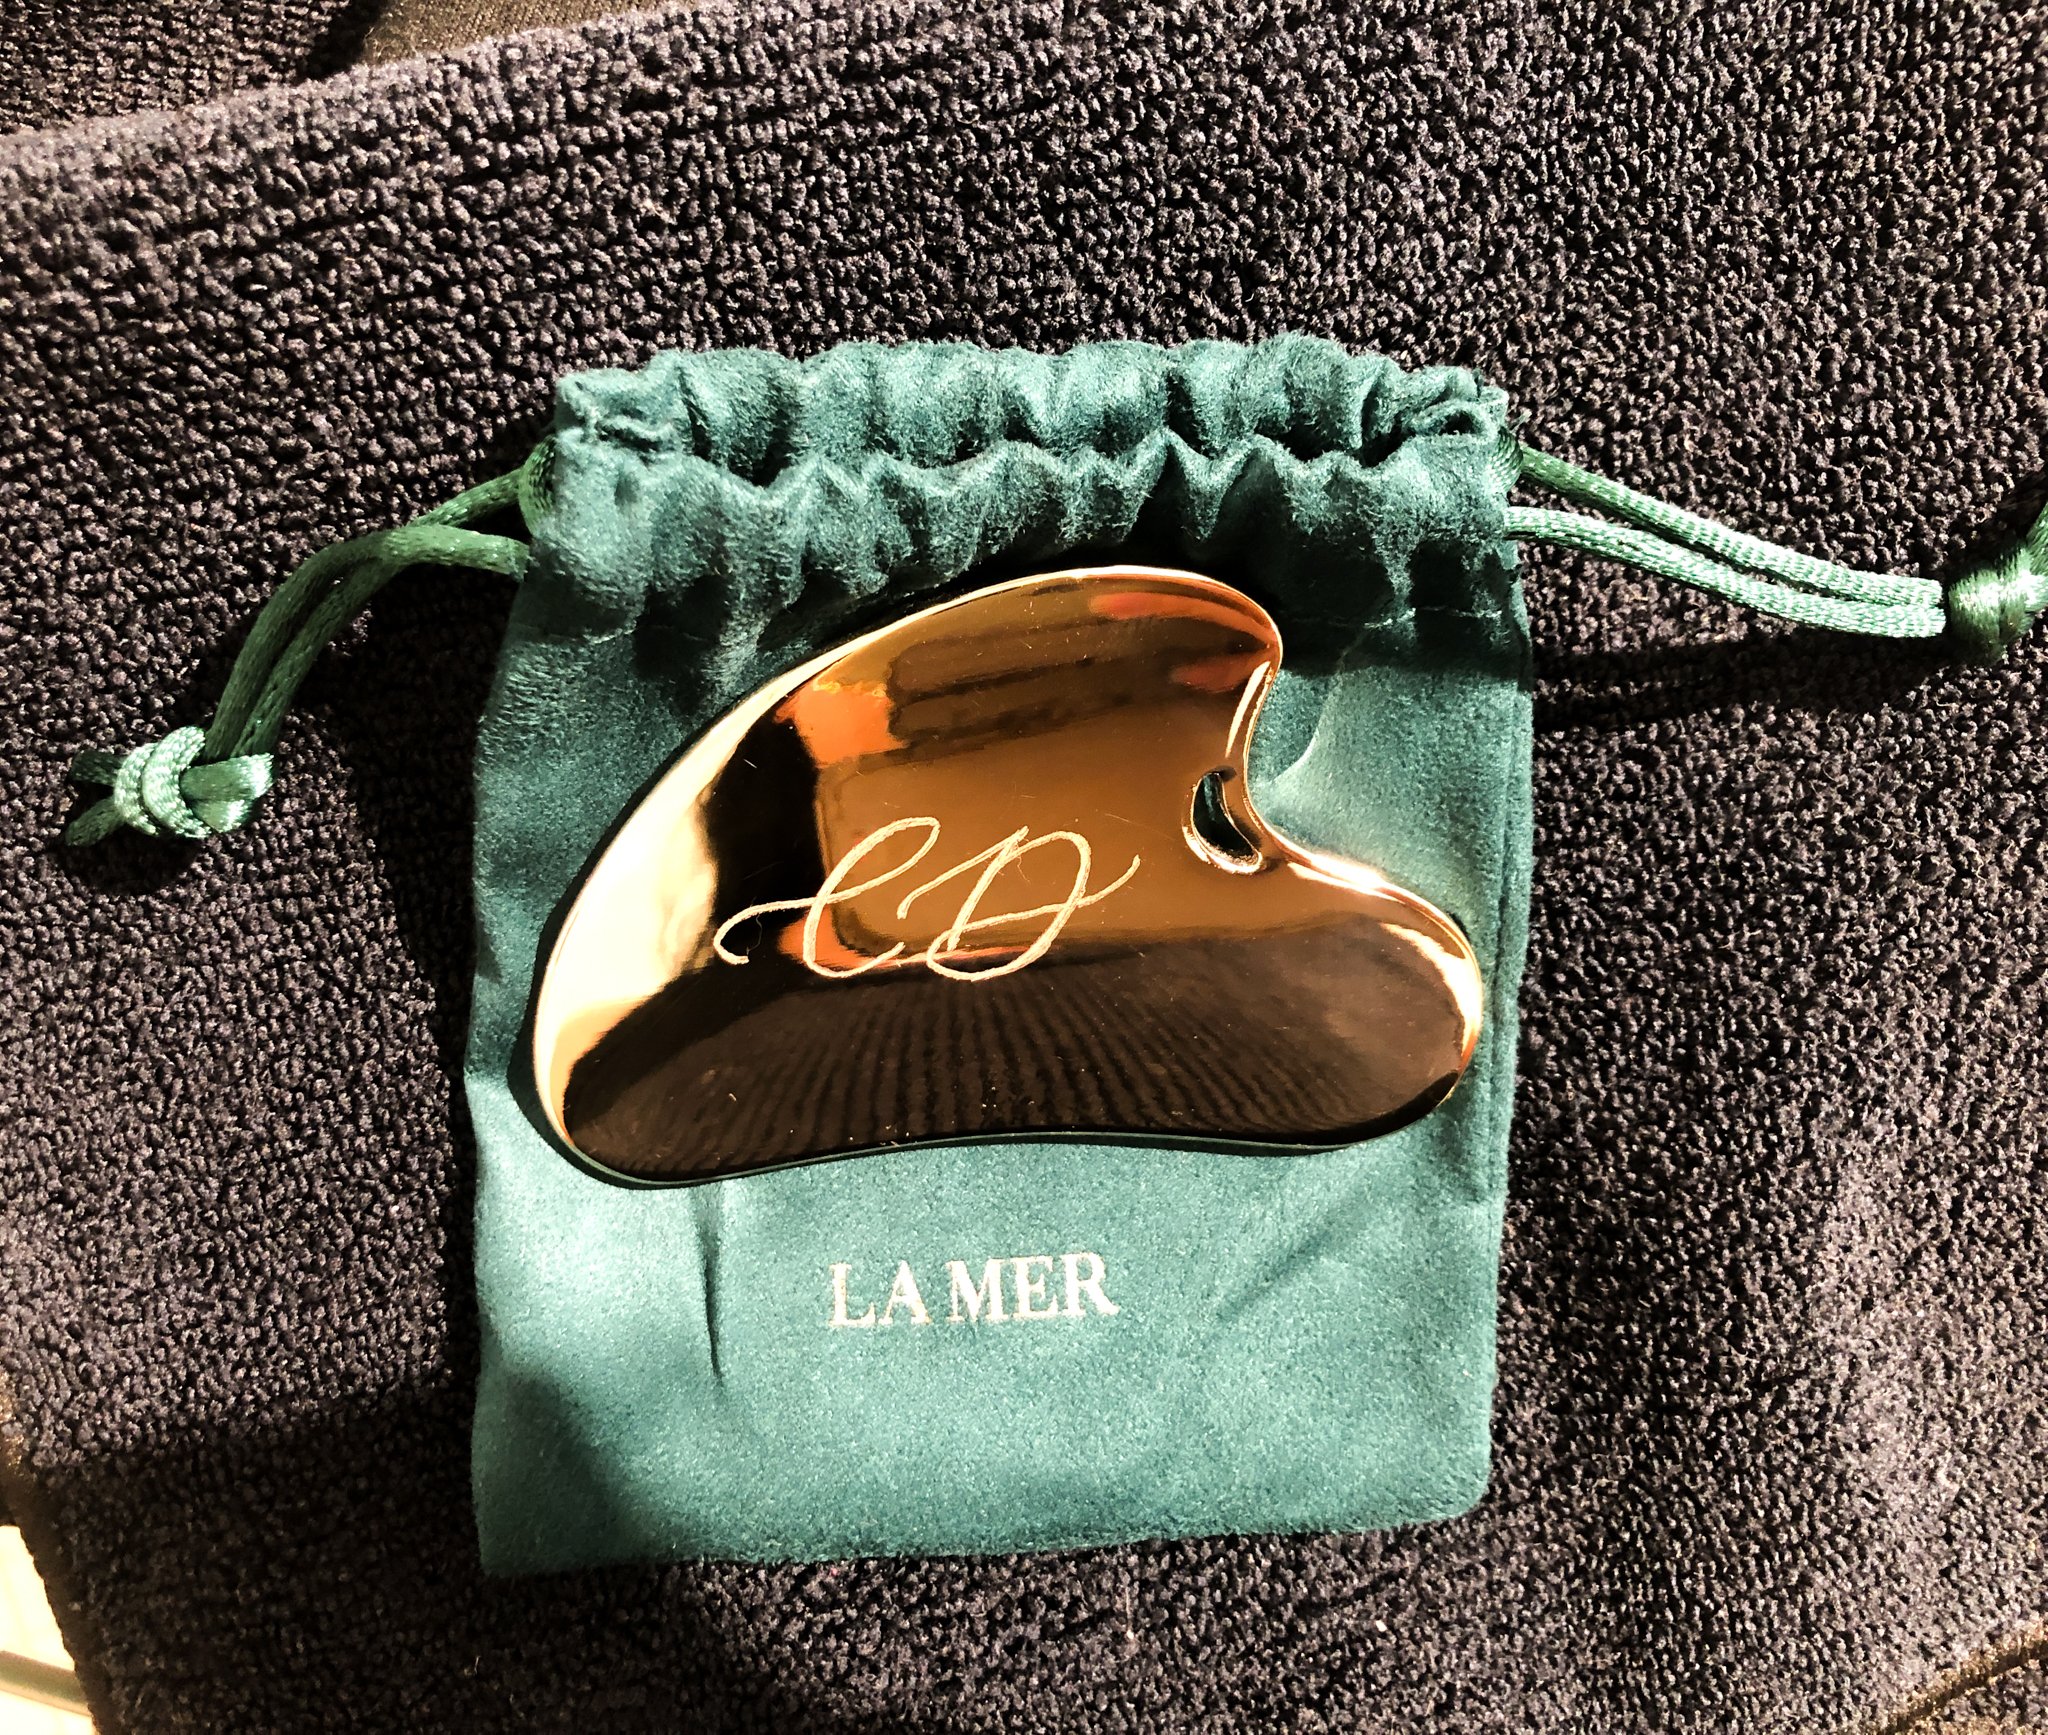 Engraving Event for La Mer